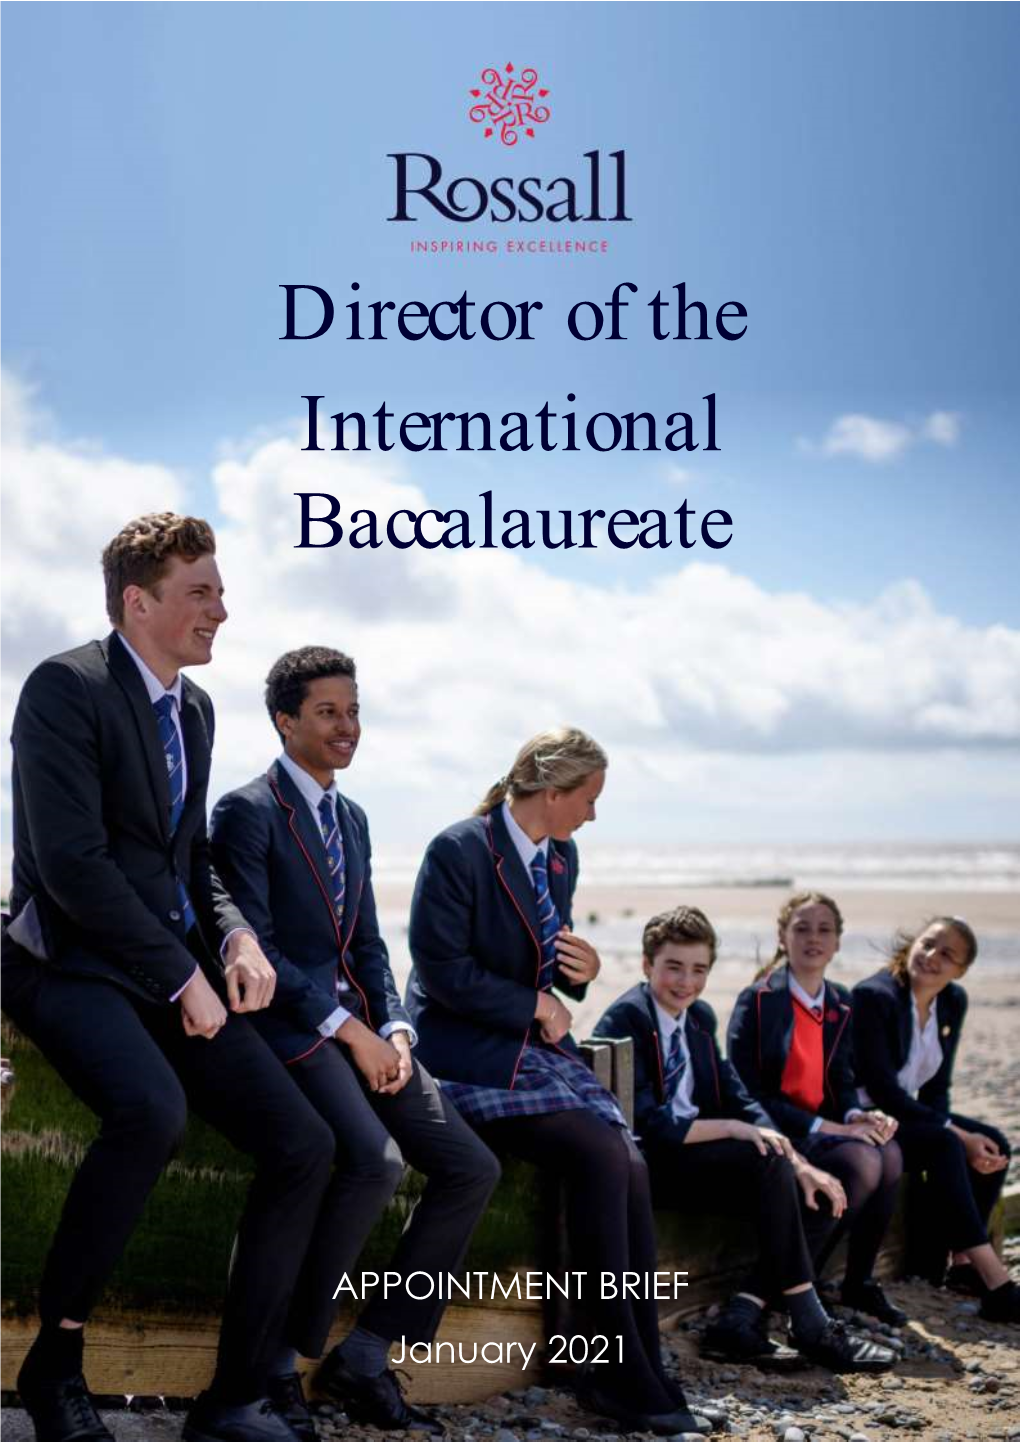 Director of the International Baccalaureate